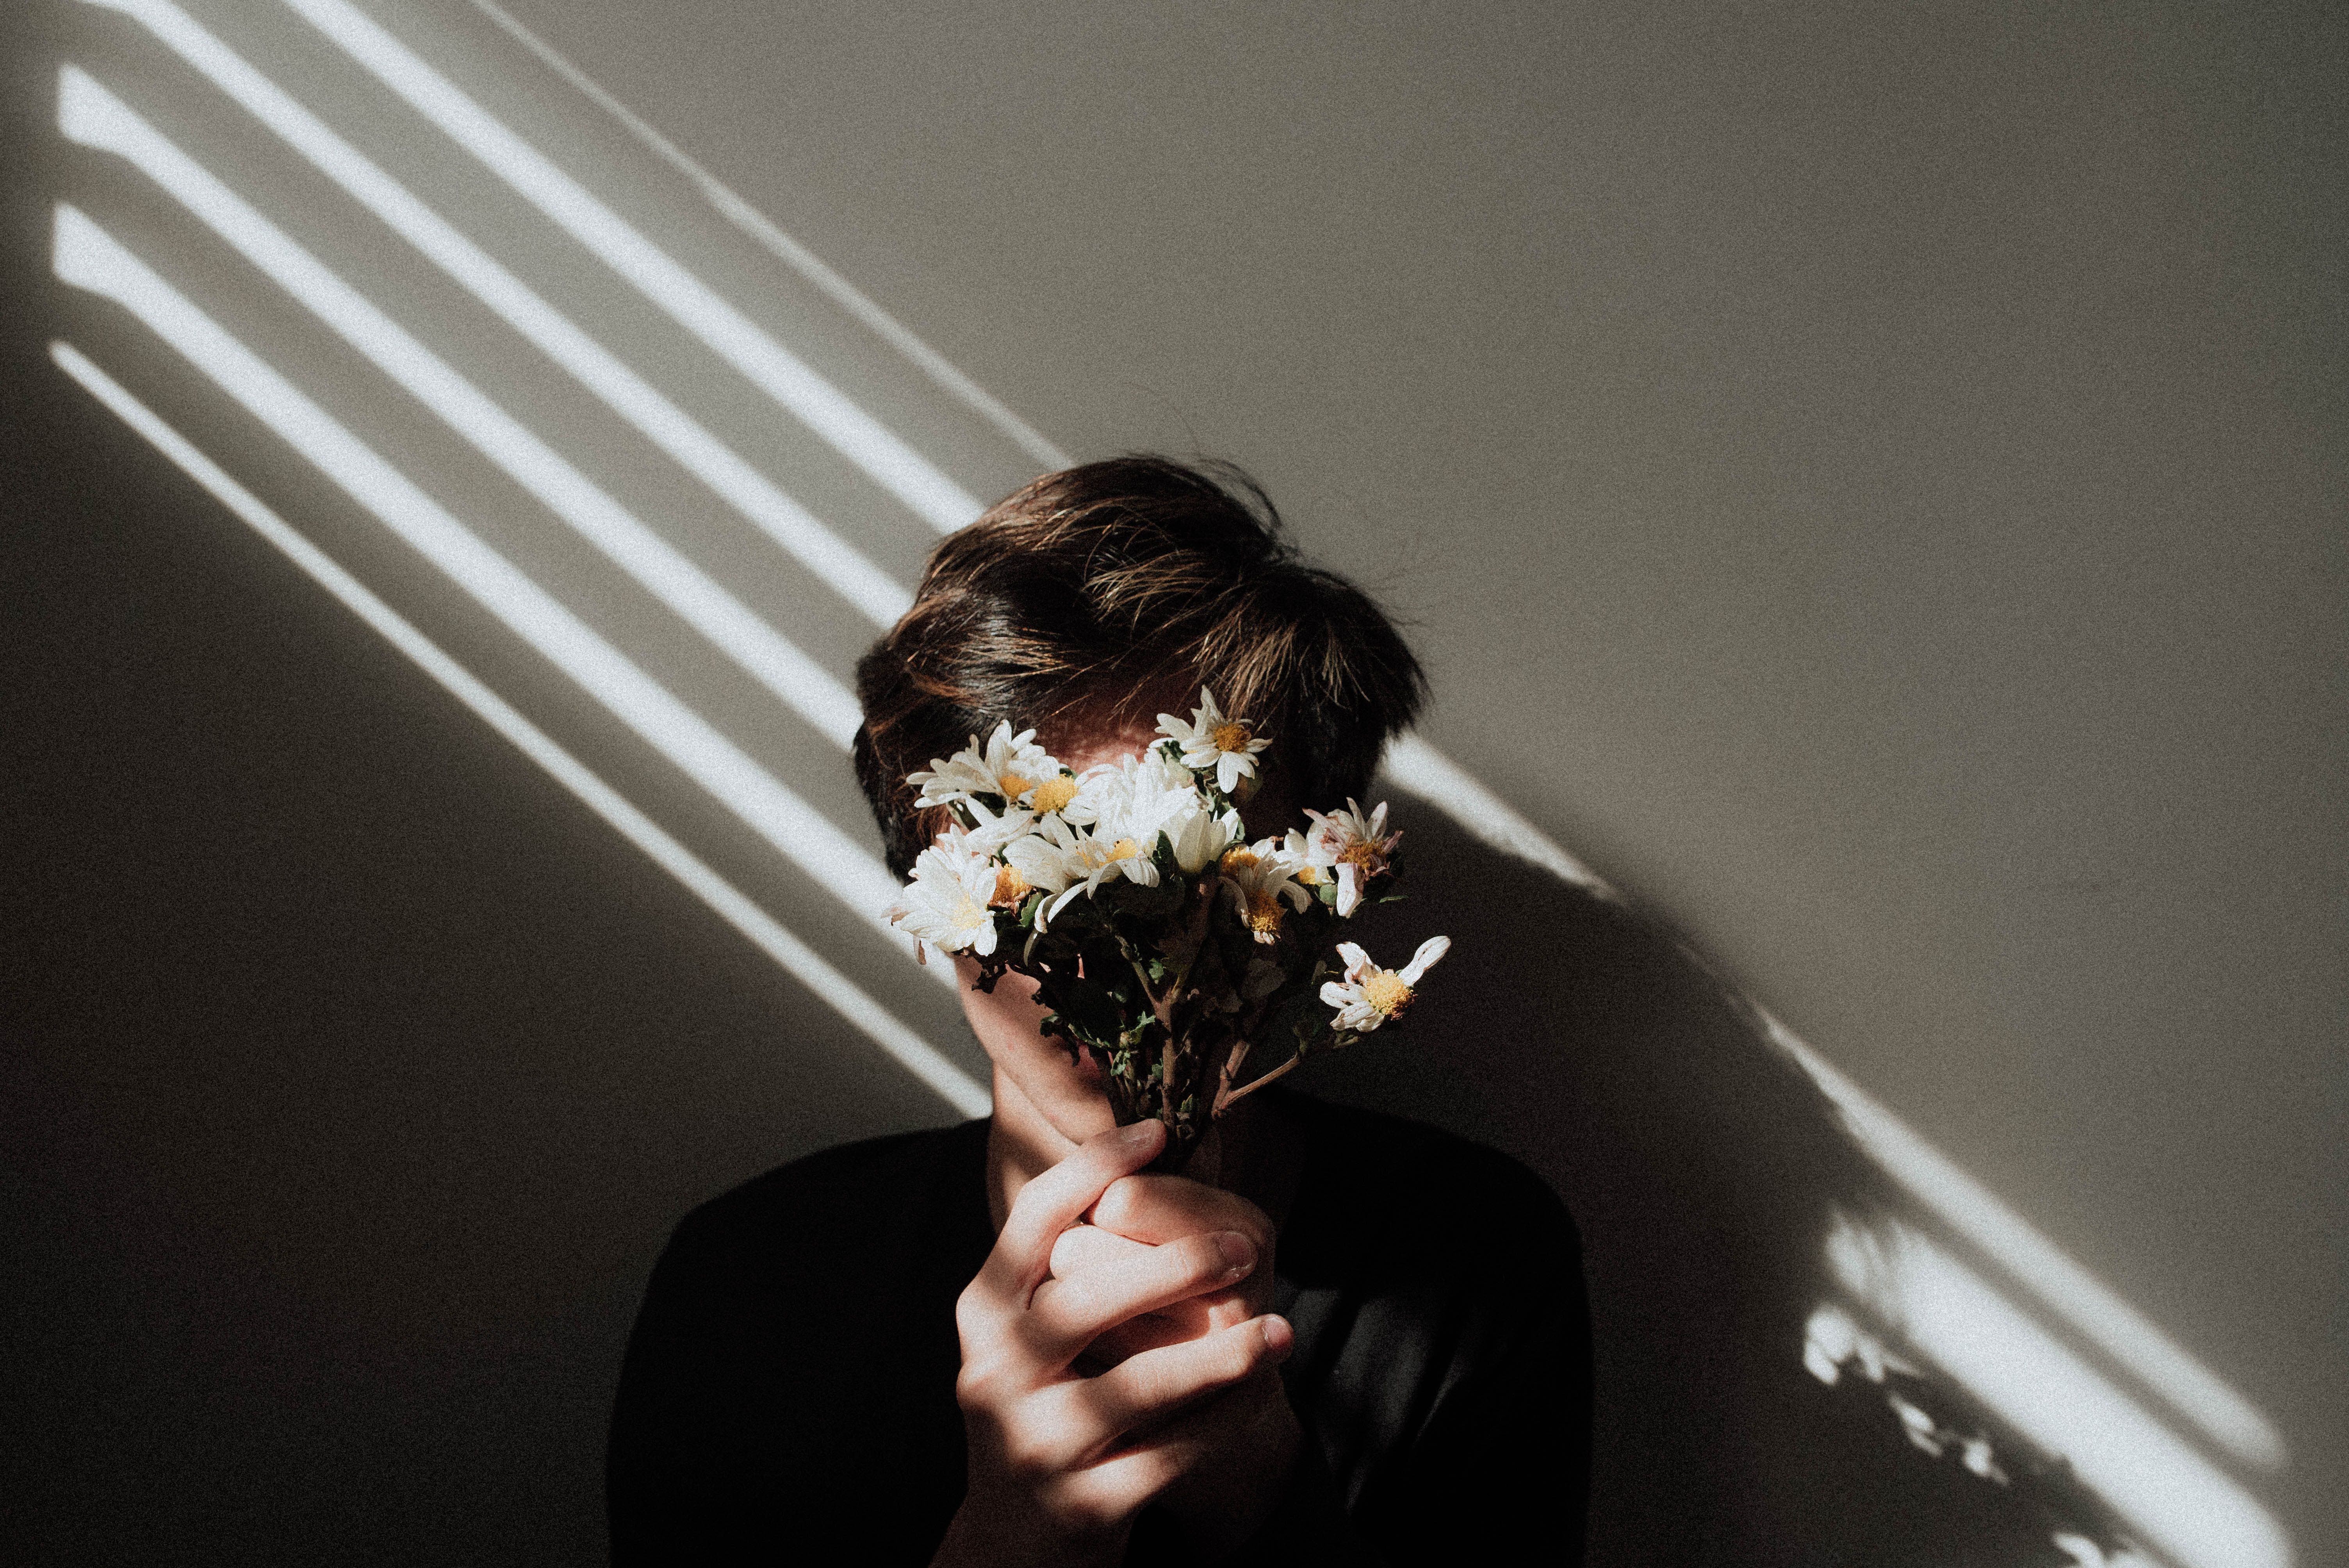 A person is holding flowers in front of their face - Vintage, daisy, shadow